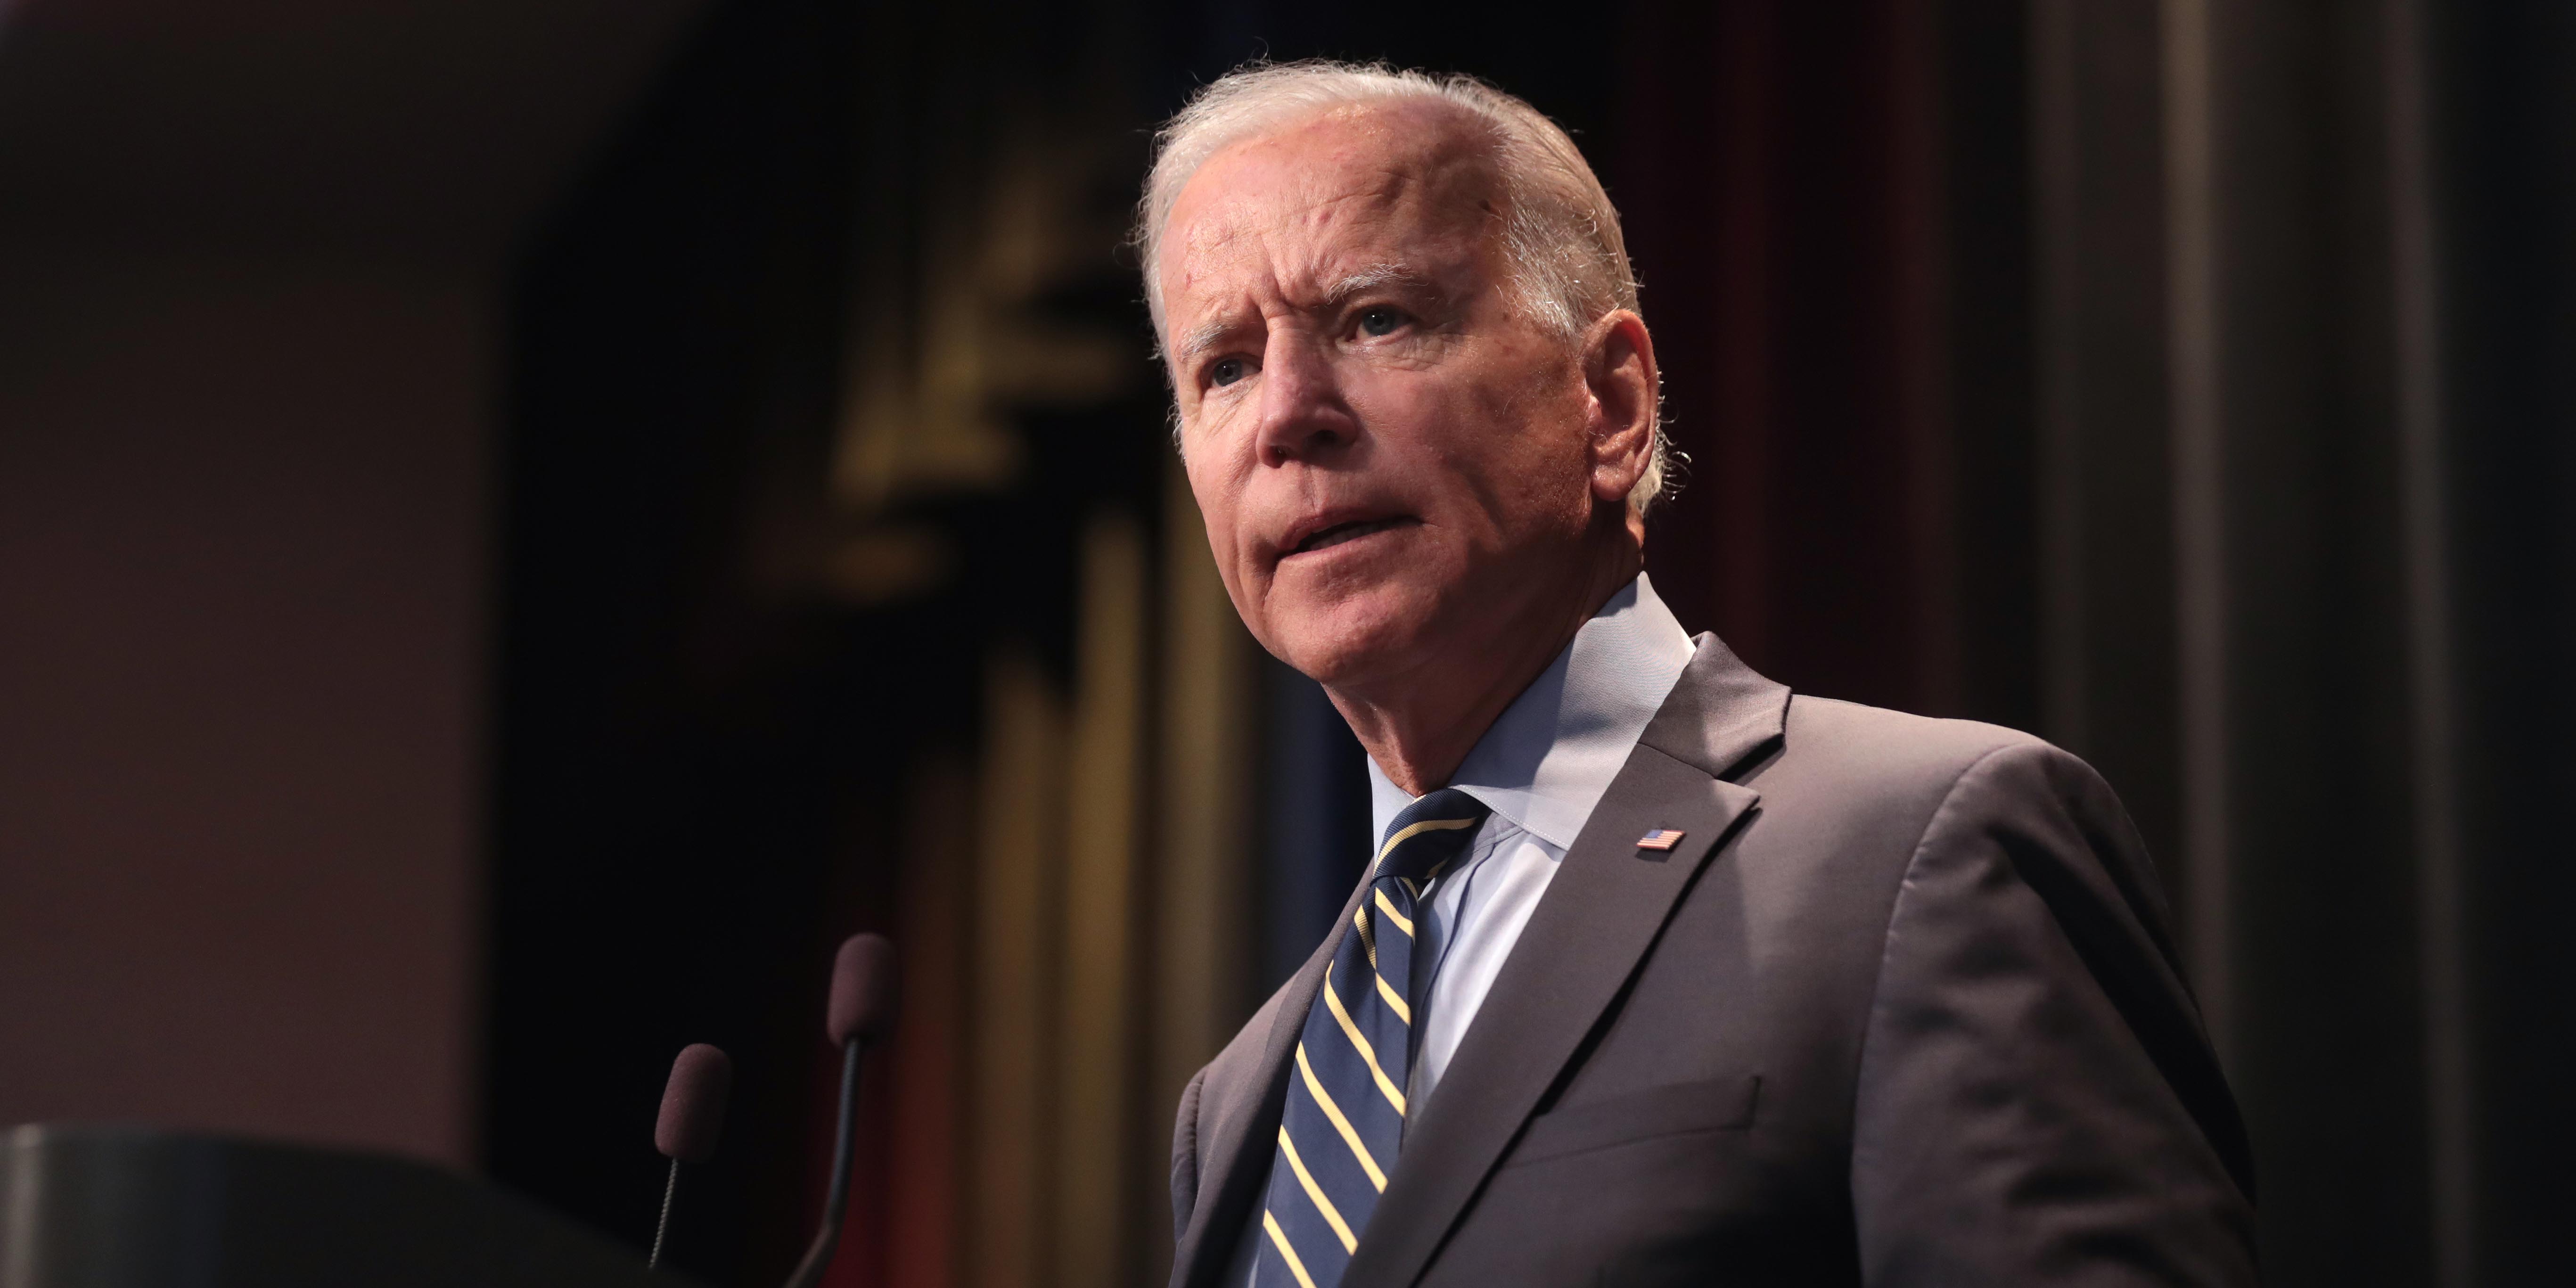 Joe Biden is too old. But who could possibly replace him?